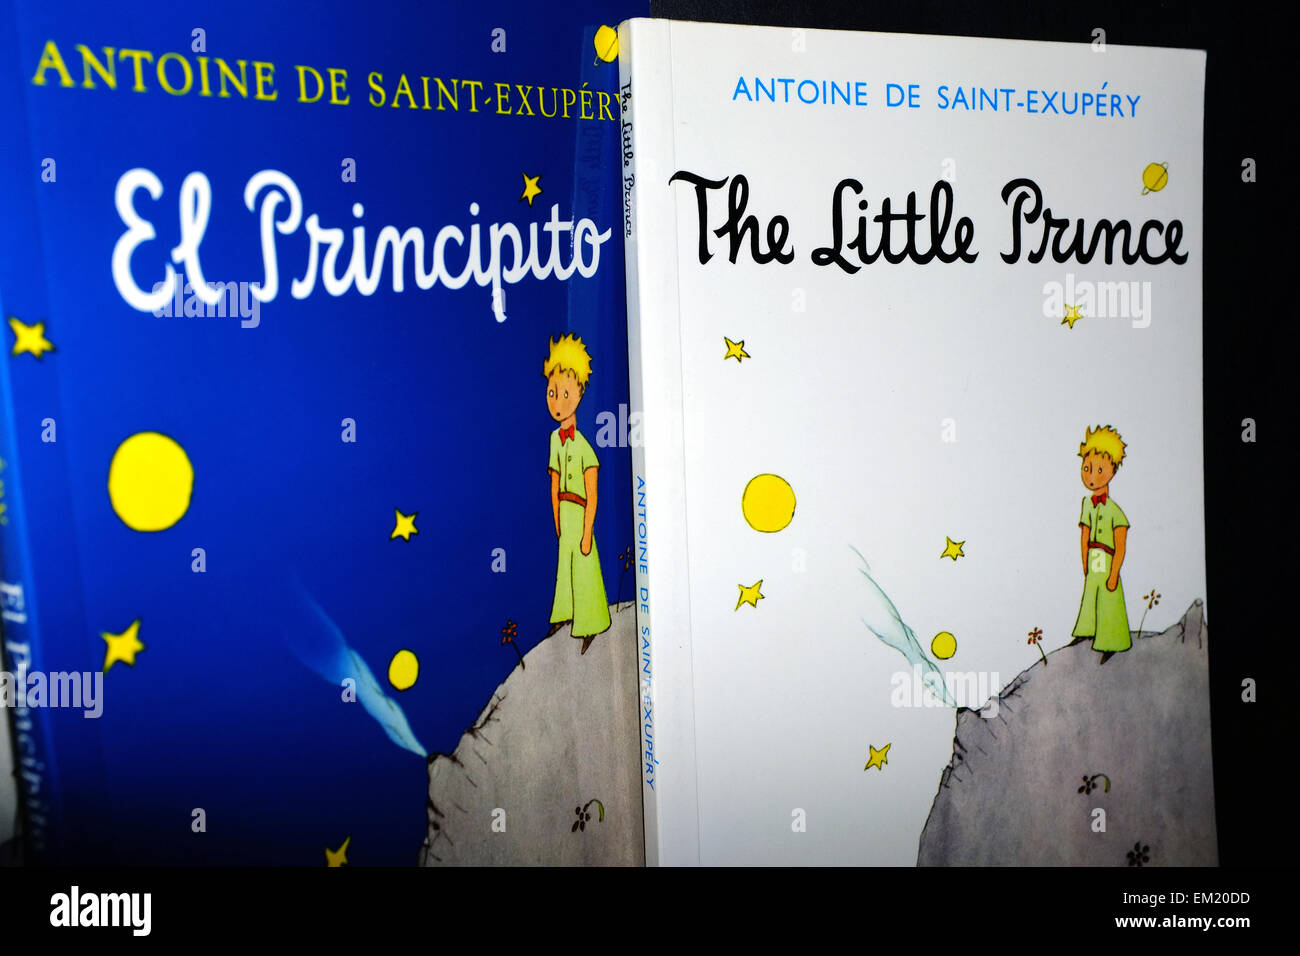 The front cover of The Little Prince in English and Spanish book photographed against a black background. Stock Photo